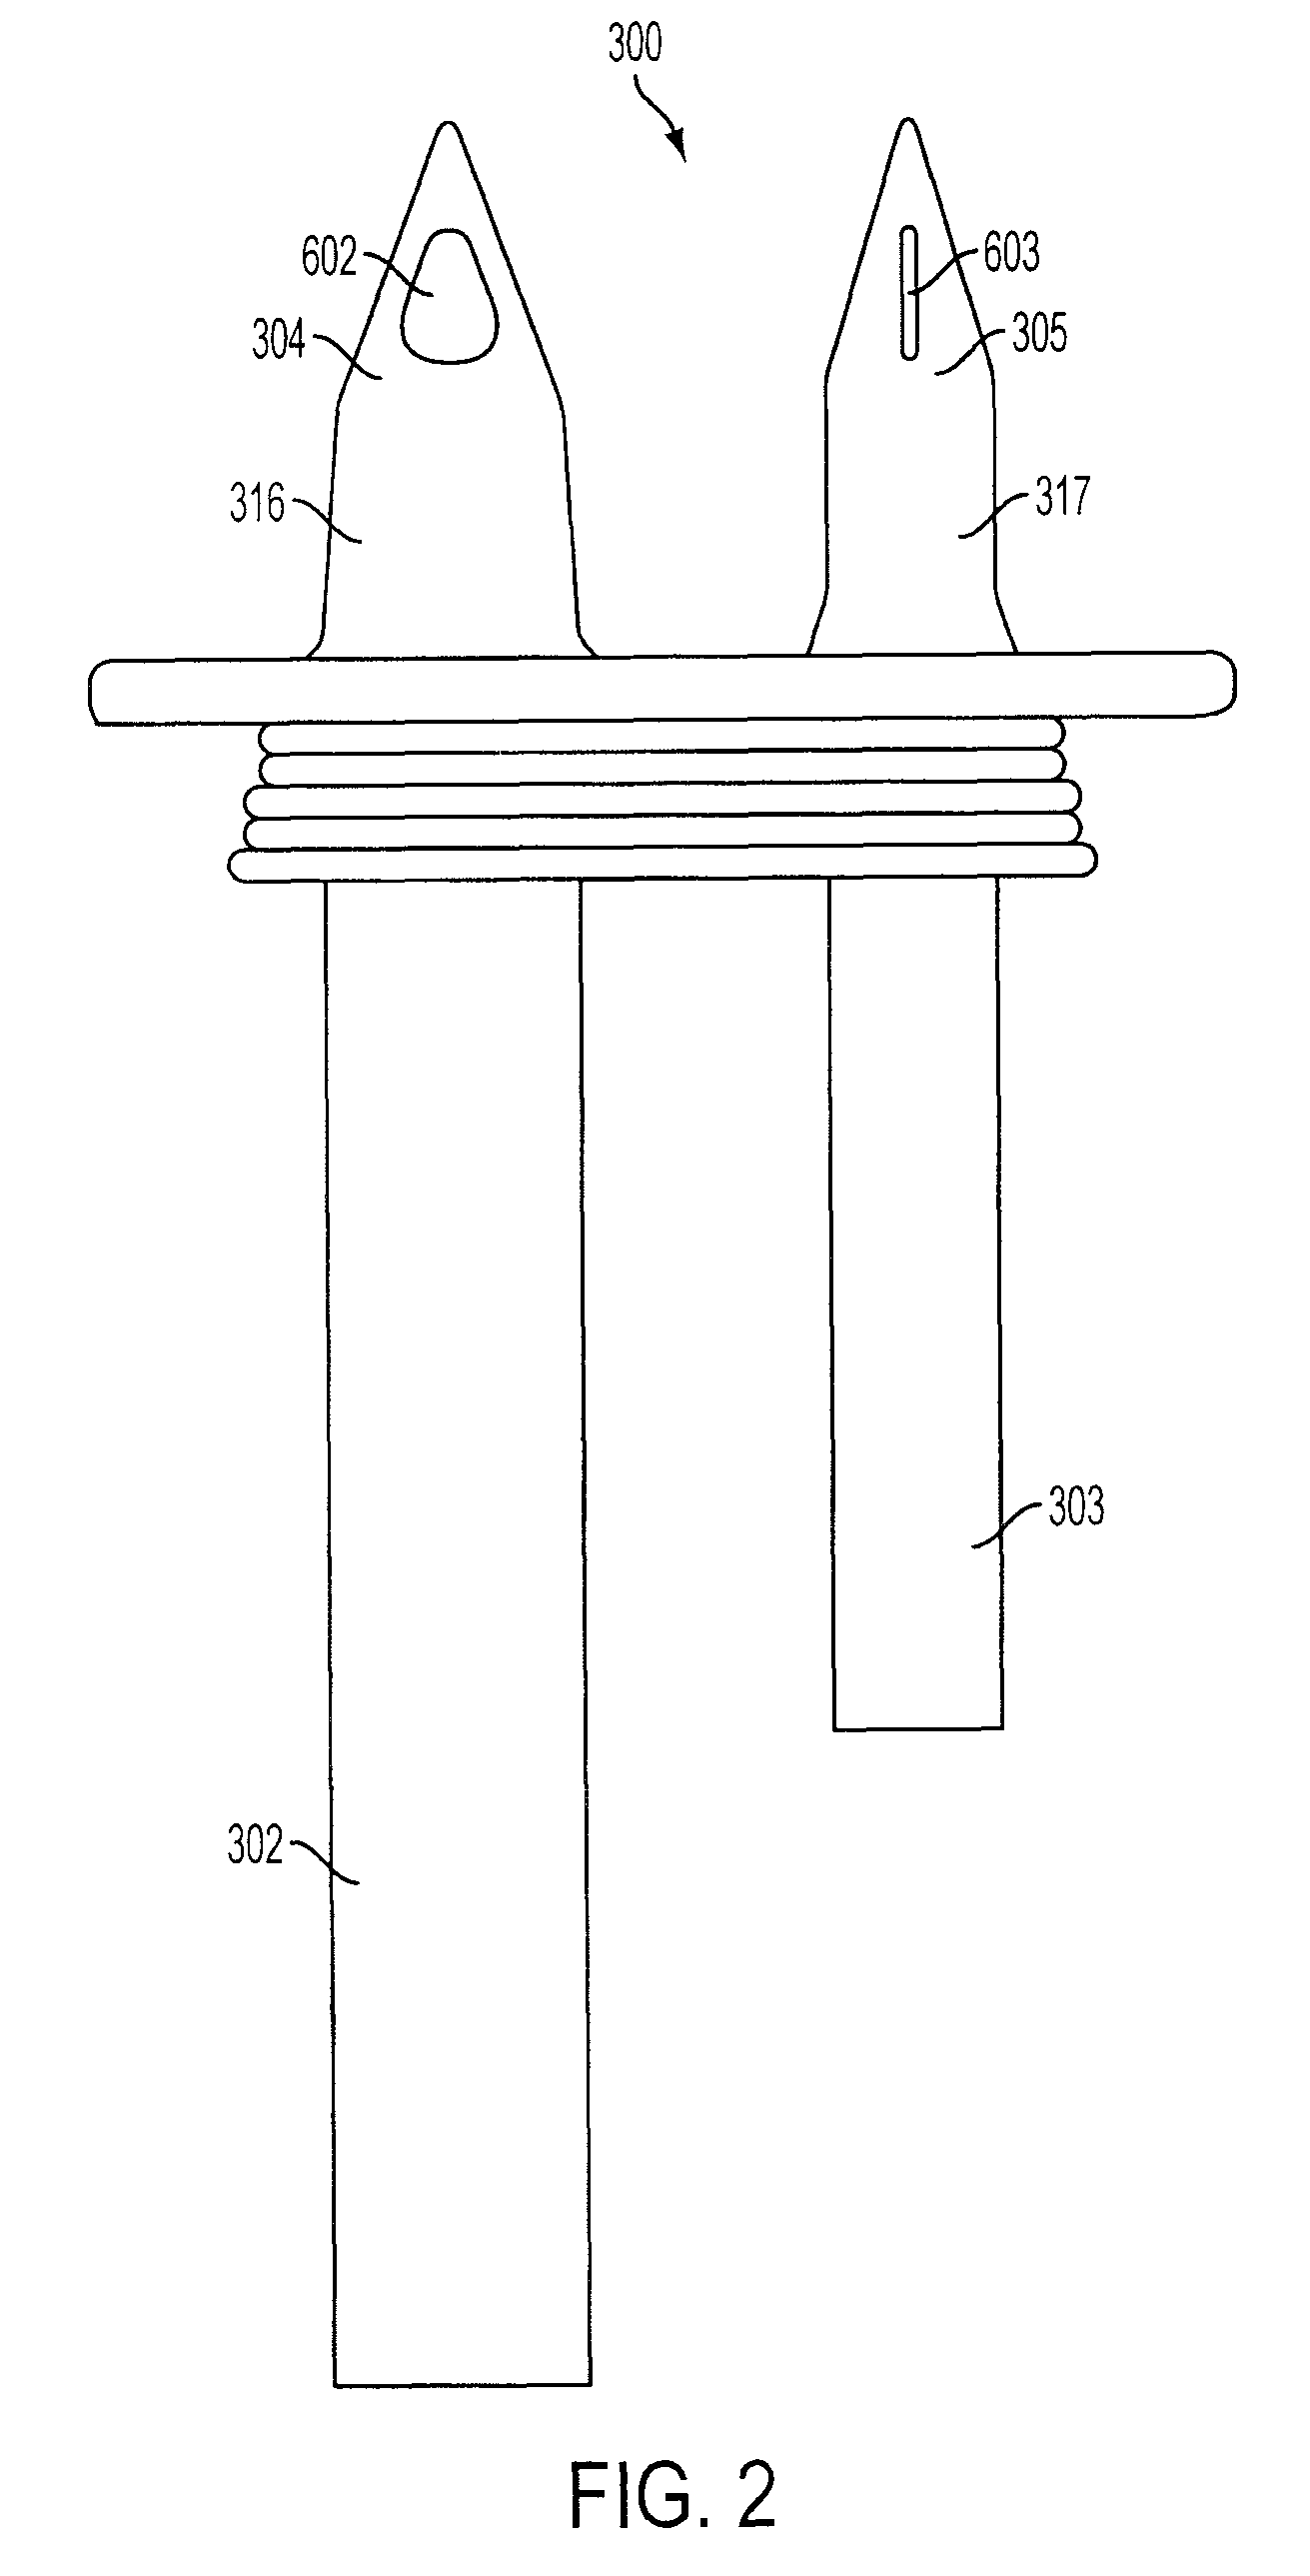 Bag cooler employing a multi-spike adapter and converter